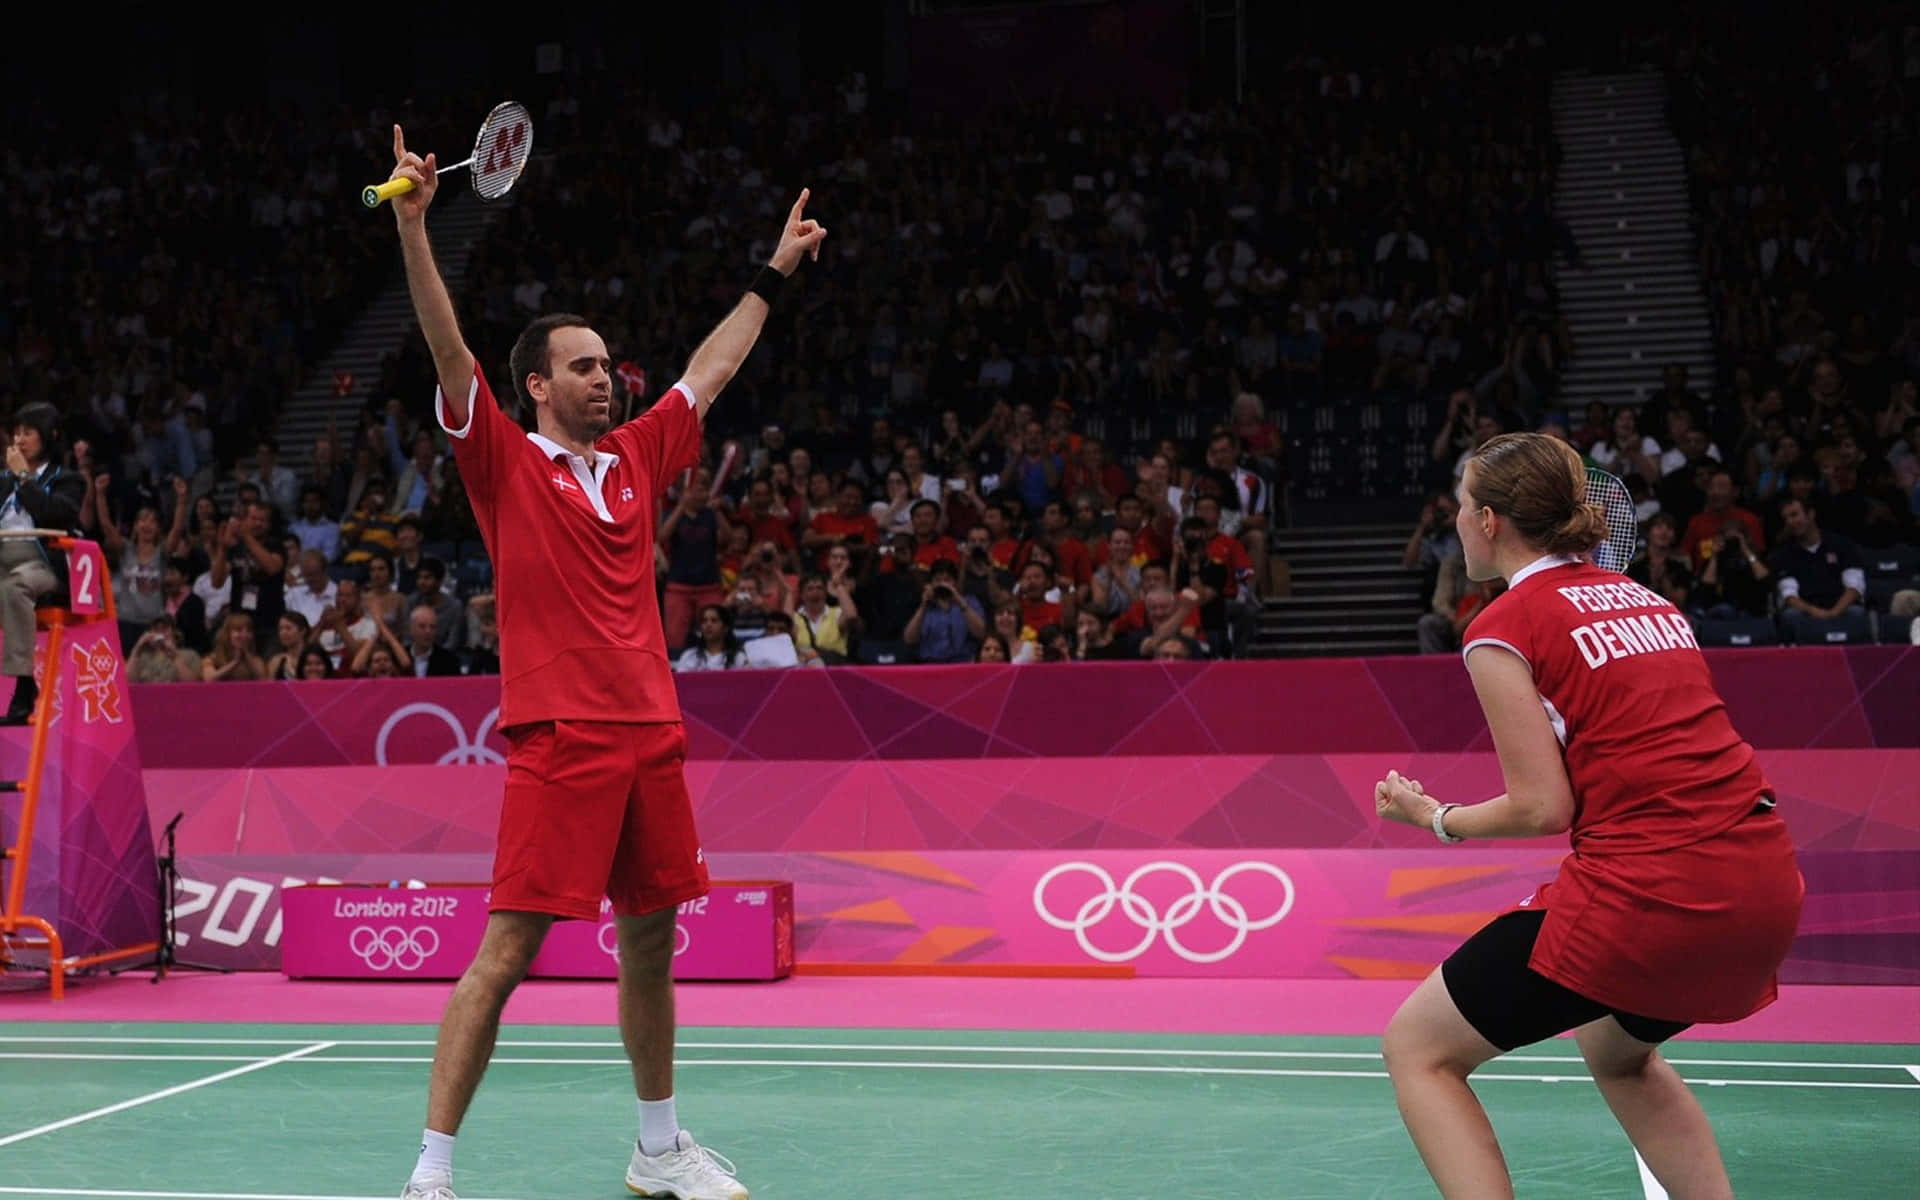 Dynamic Action as Female Badminton Player Strikes the Shuttlecock